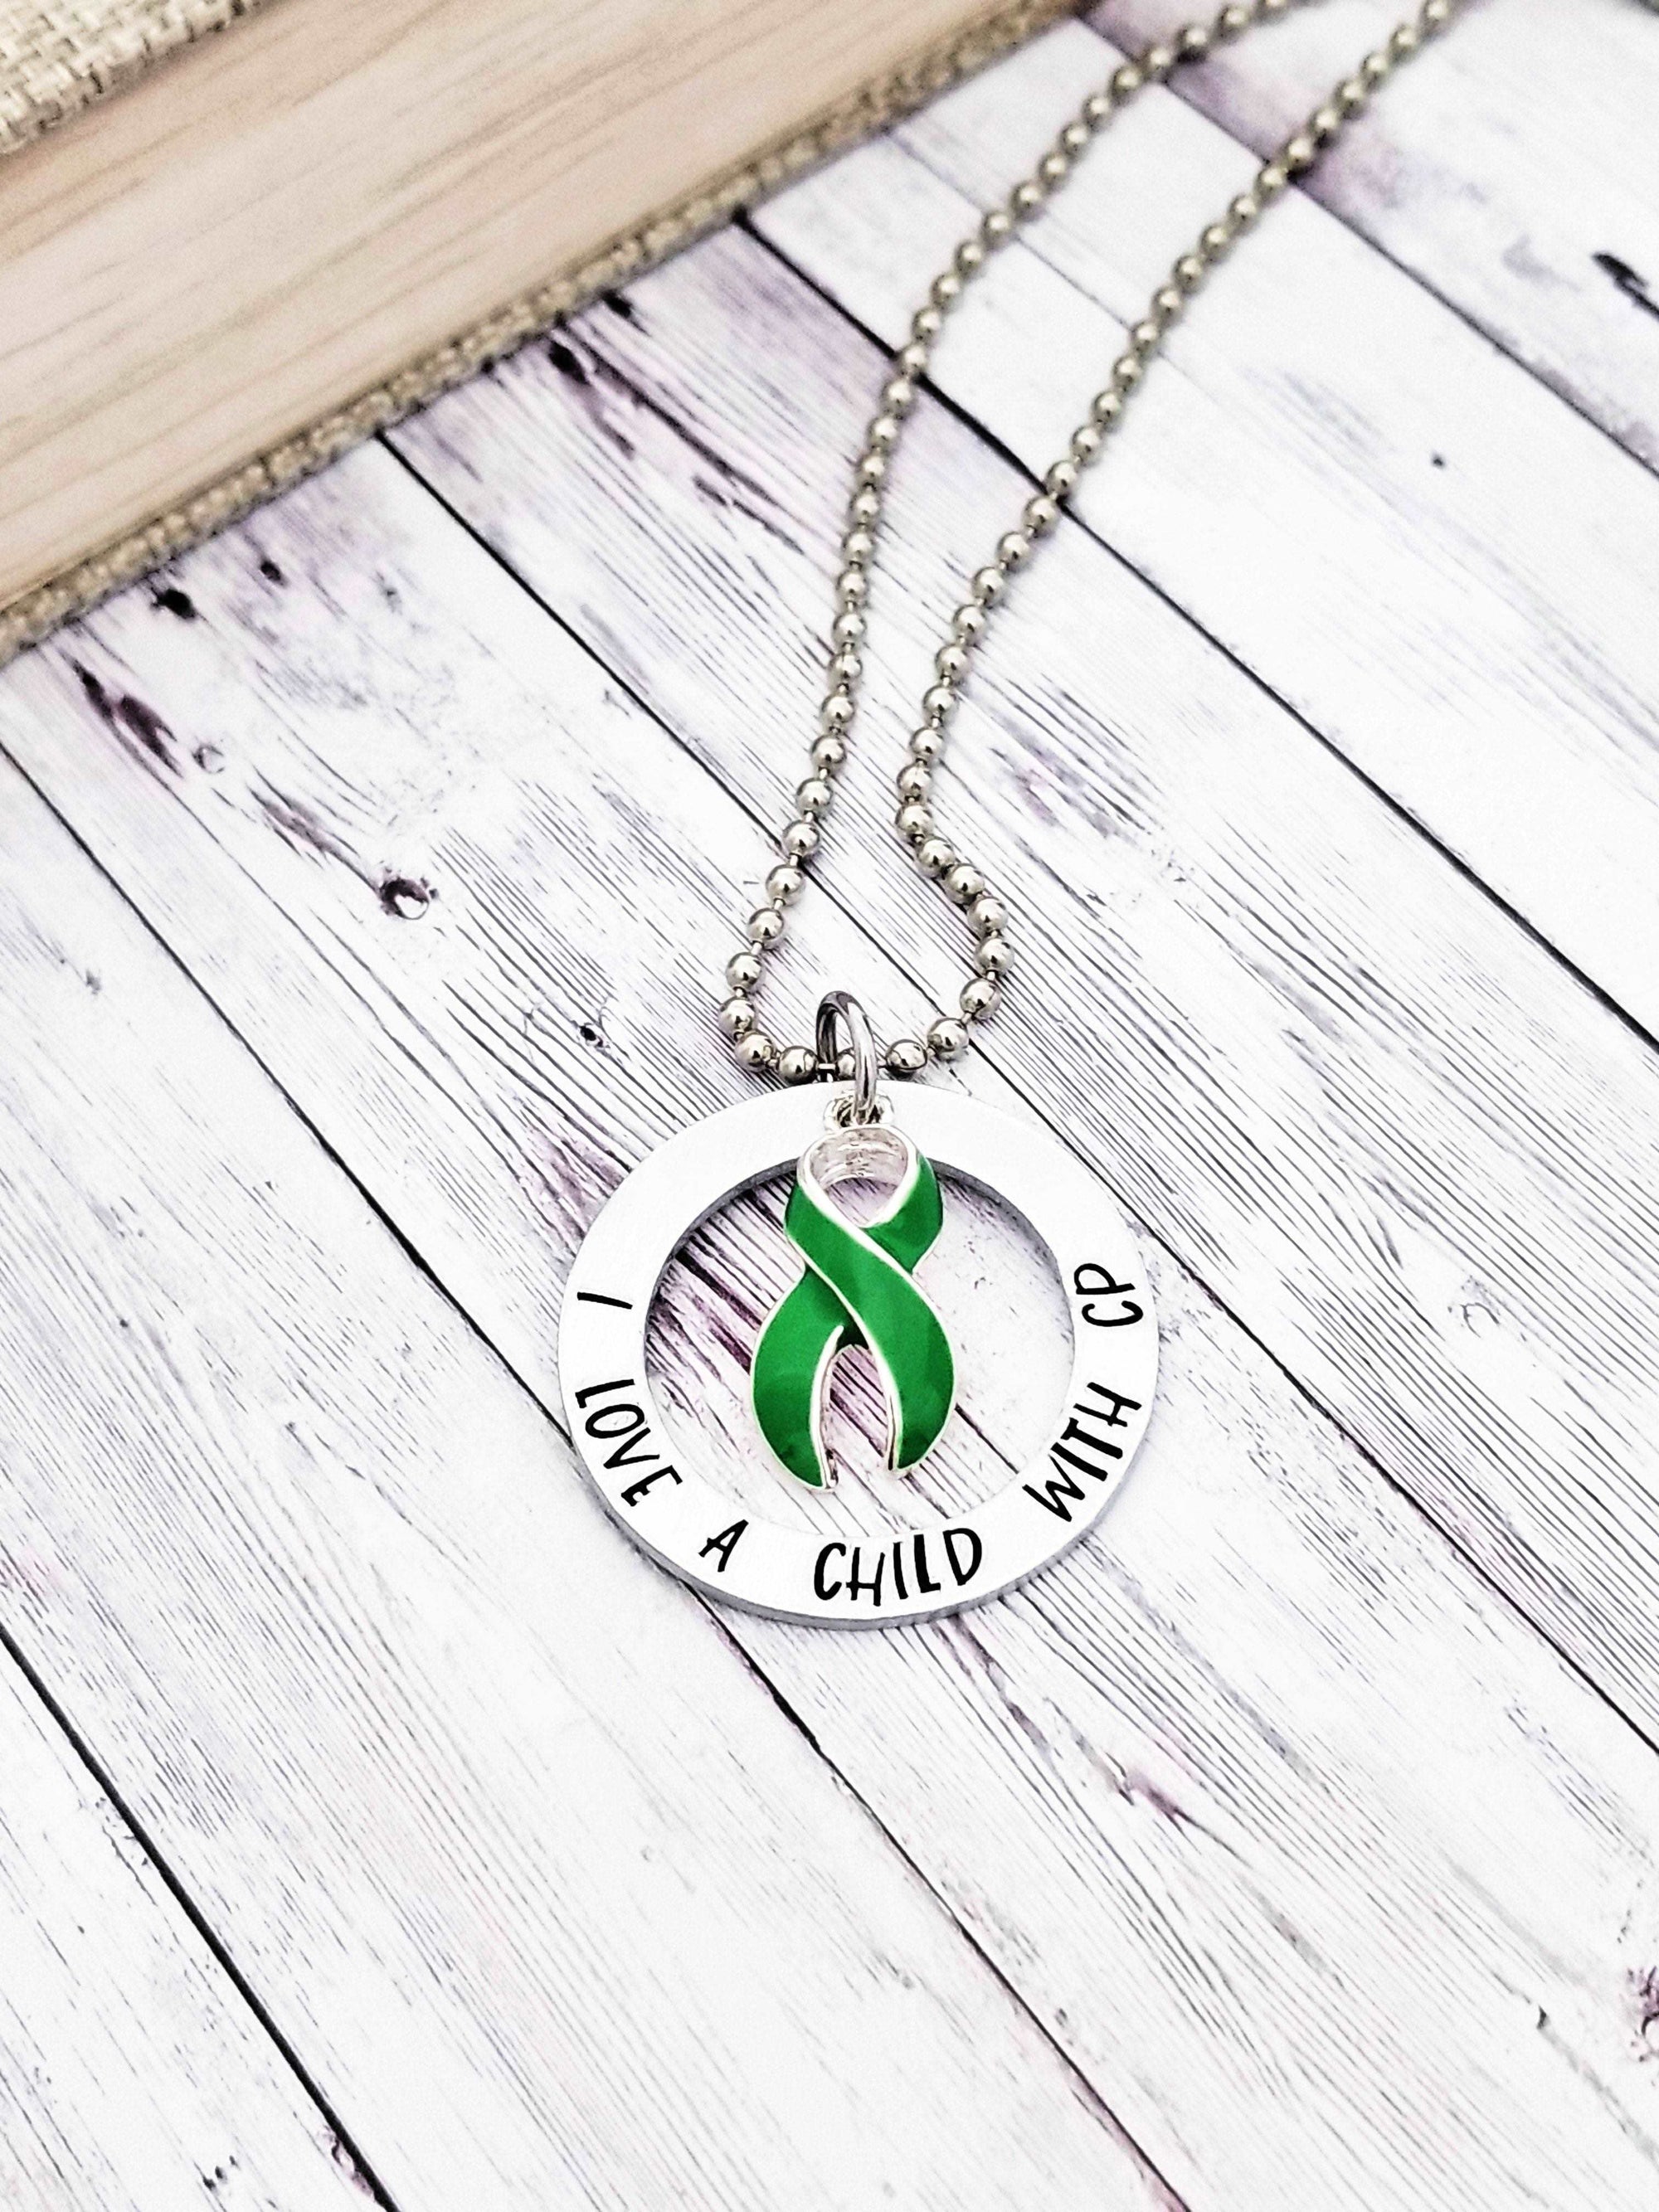 I Love a Child With CP Necklace, Cerebral Palsy Awareness, Cerebral Palsy Jewelry, CP Jewelry